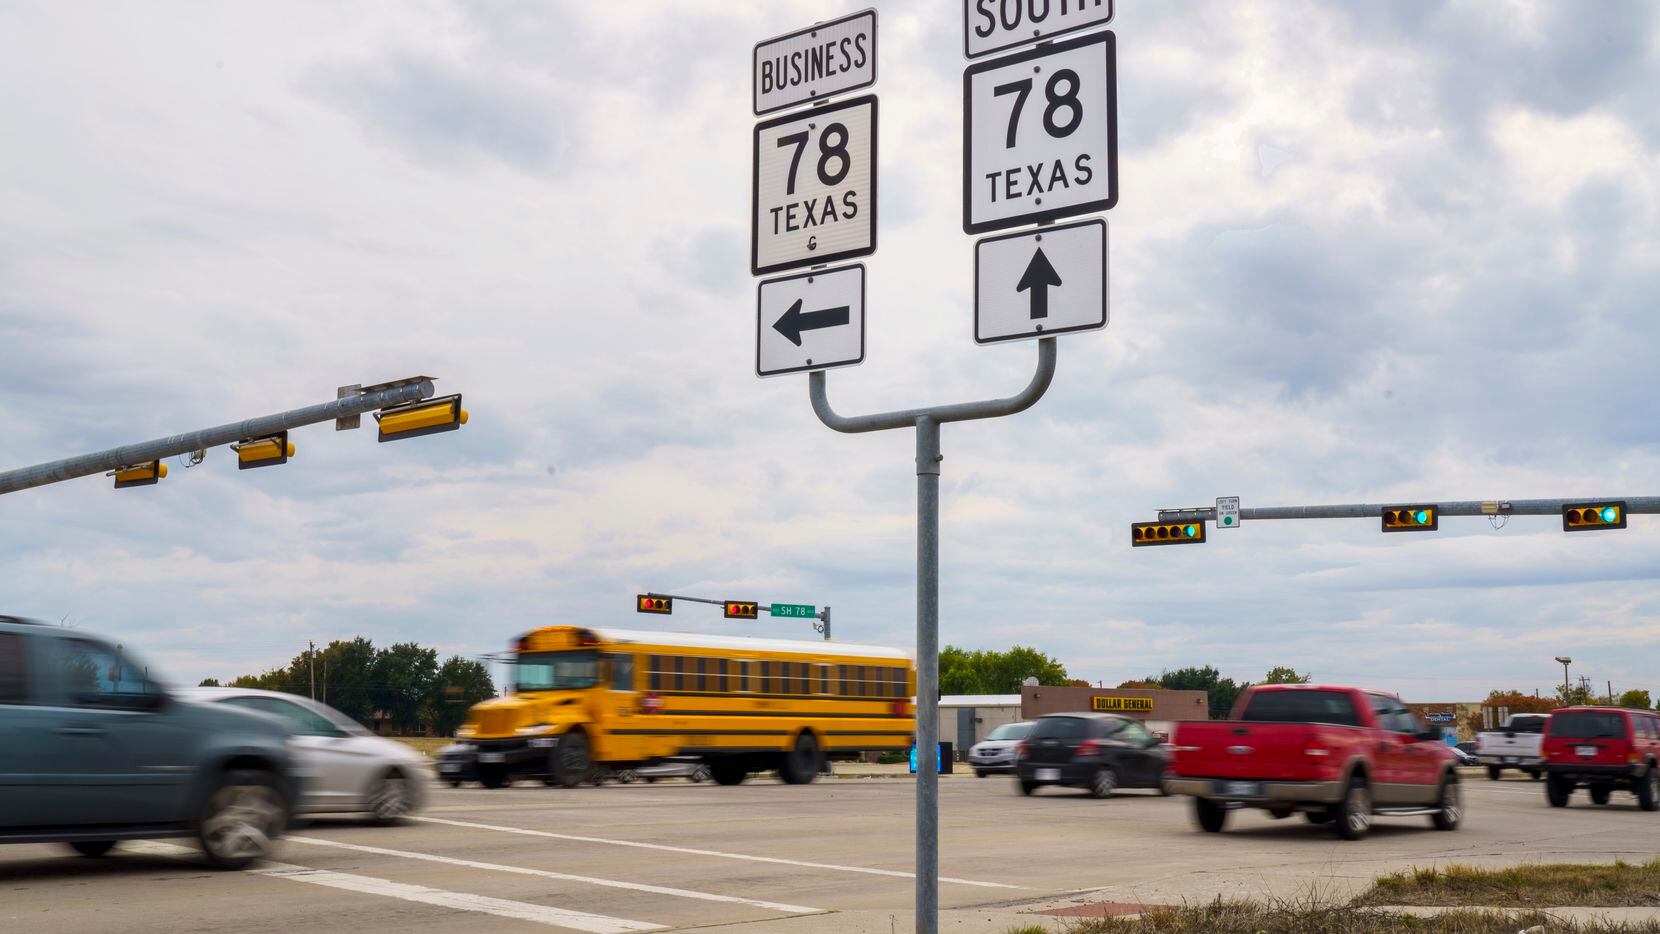 Collin County is looking for feedback about transportation issues in the region.